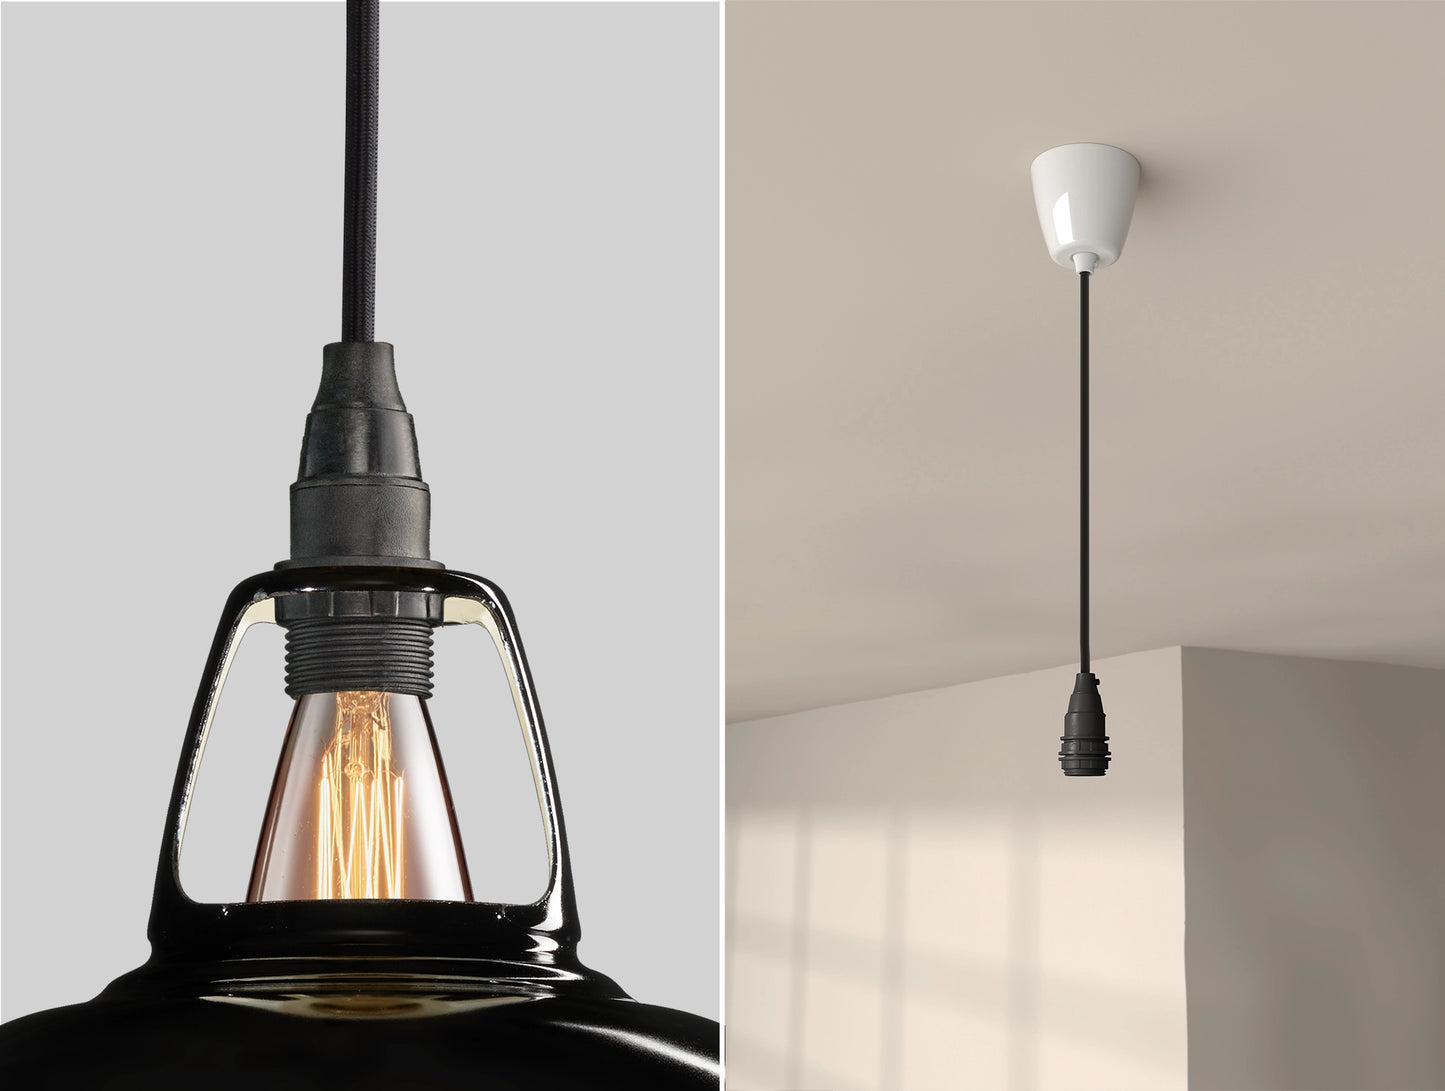 Close up of an E14 Industrial suspension set on a Jet Black lampshade on the left. On the right, an E14 Industrial pendant set is hanging from the ceiling